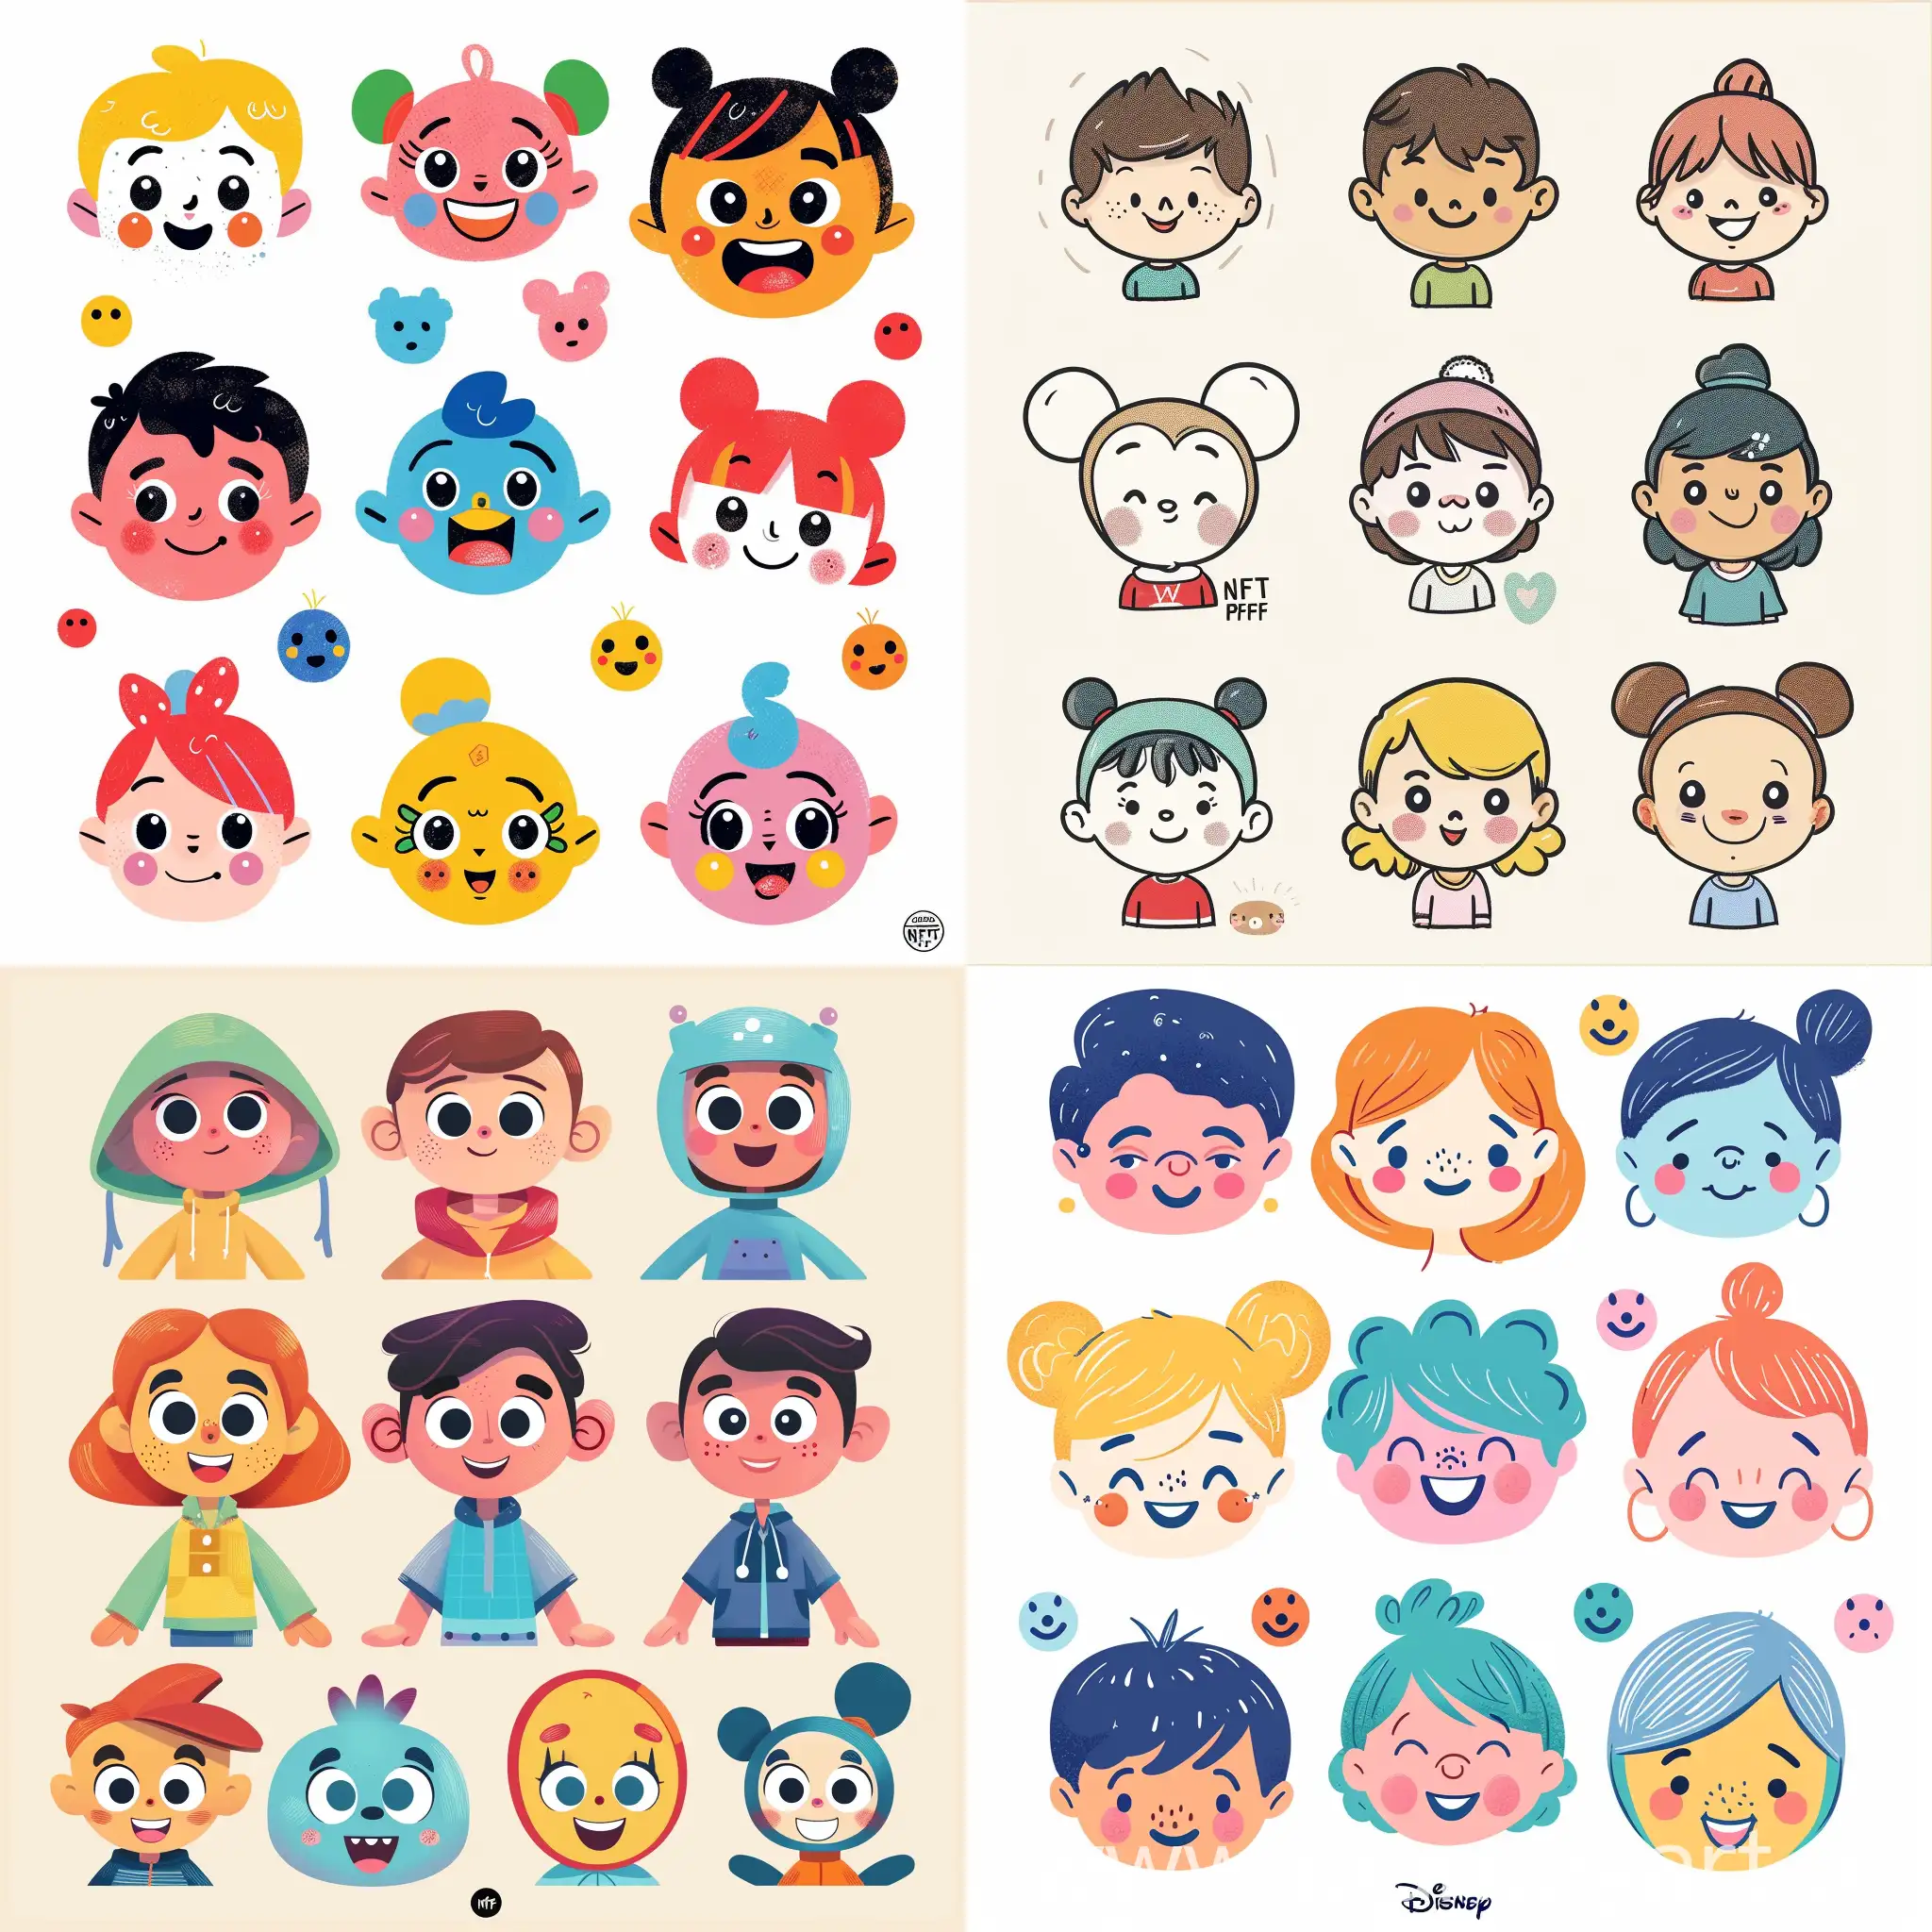 Cheerful-Disneyinspired-NFT-Avatar-Collection-with-Polished-Smiley-Faces